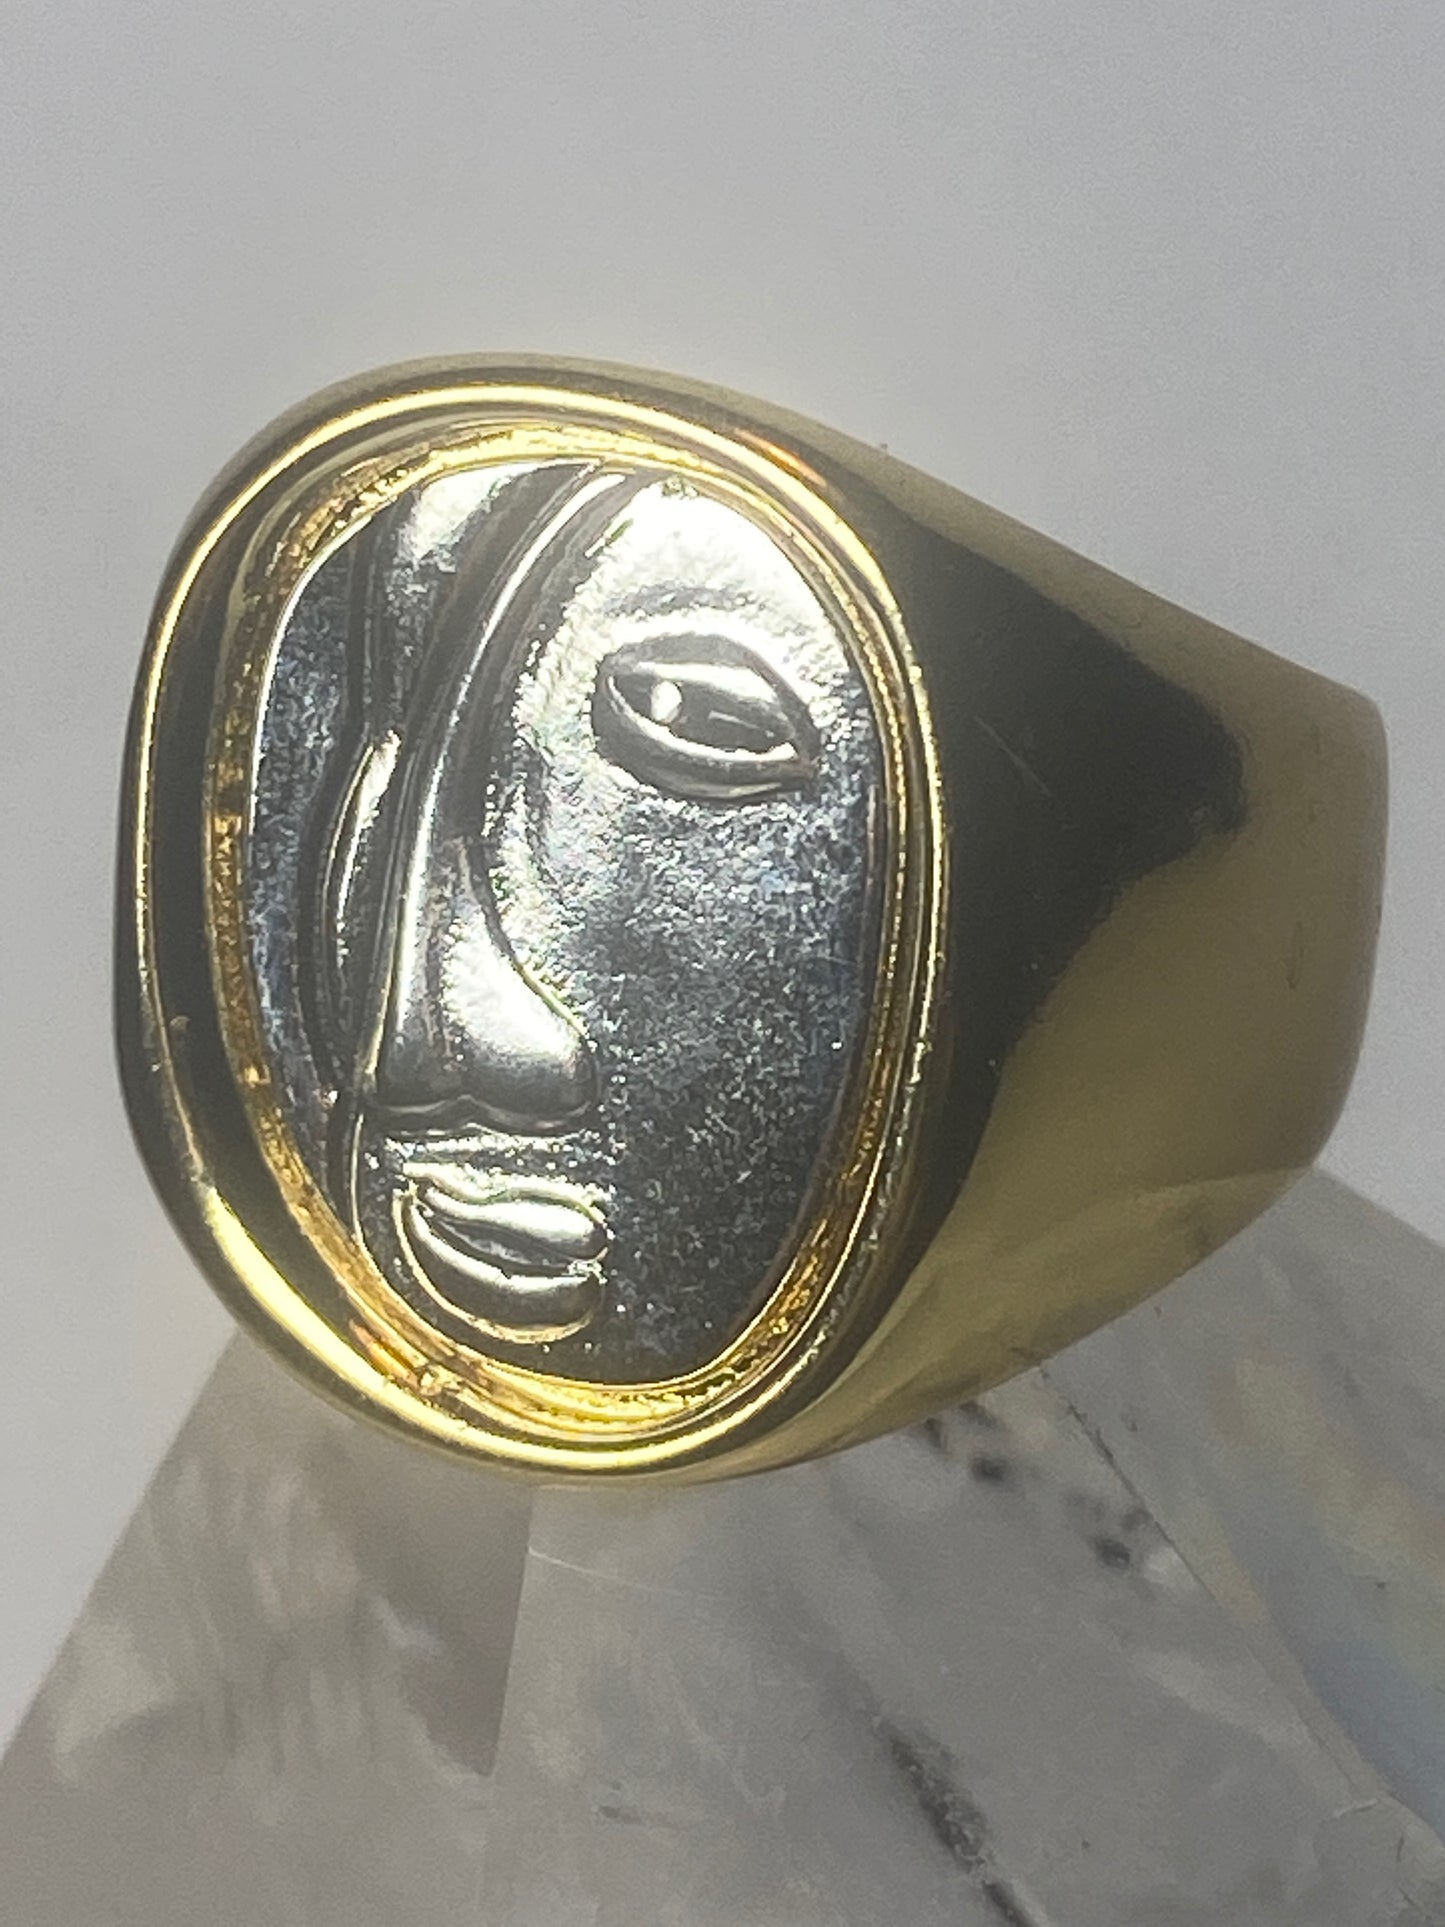 Face ring figurative band sterling silver women unknown type of gold over